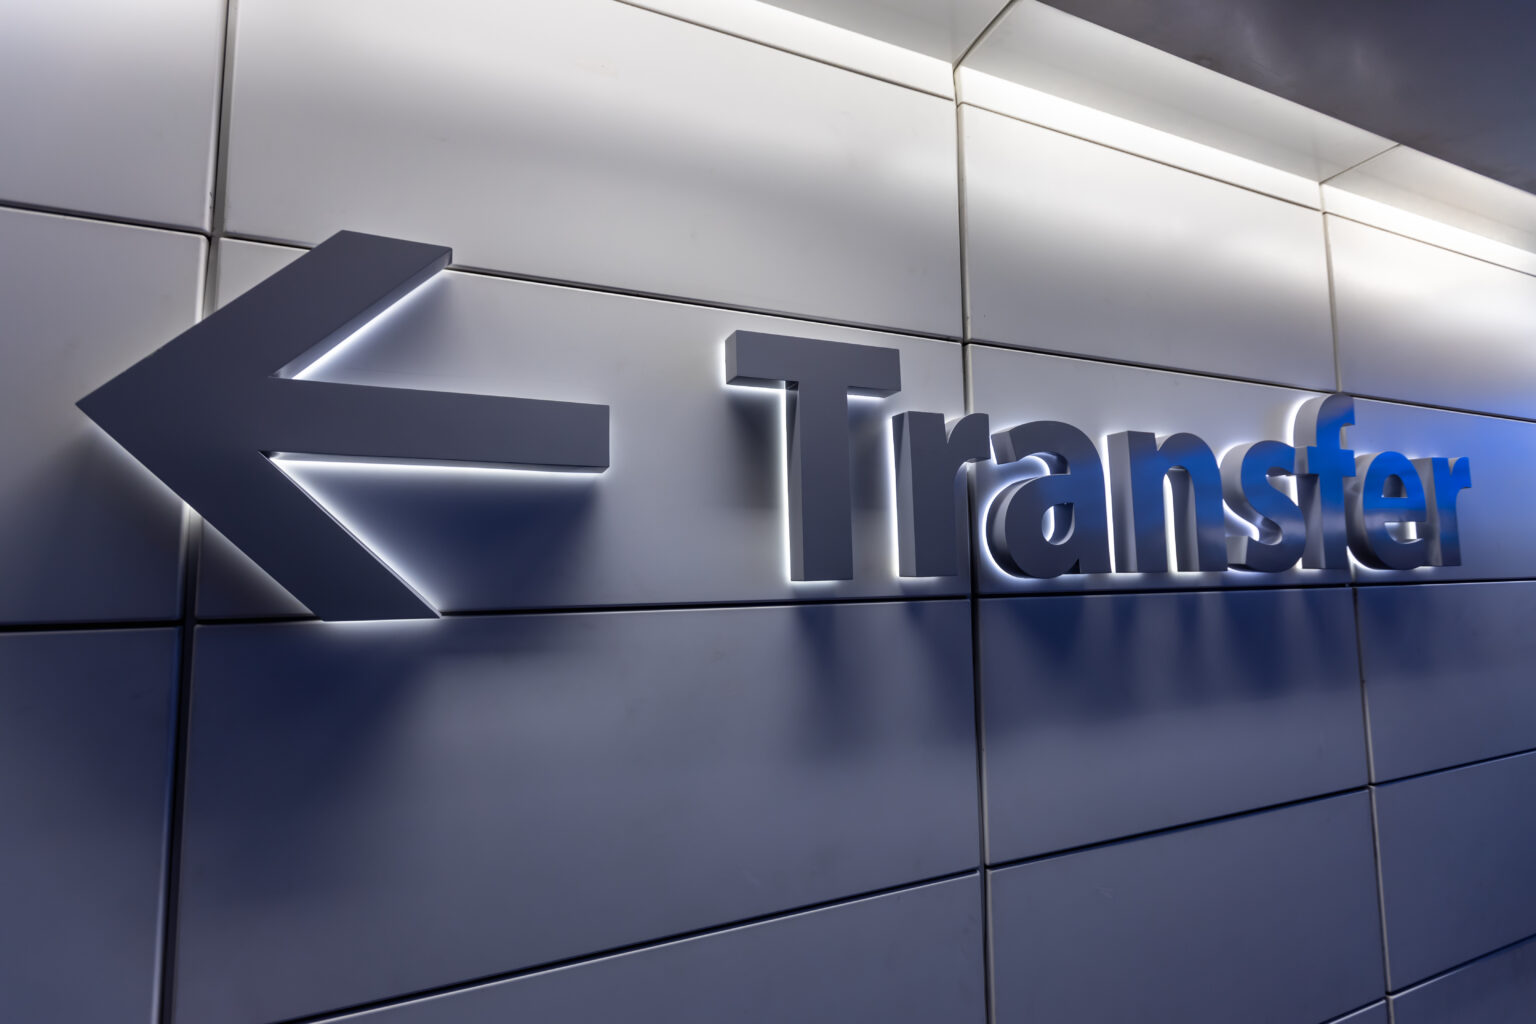 An image of a backlit “Transfer” sign with an arrow pointing